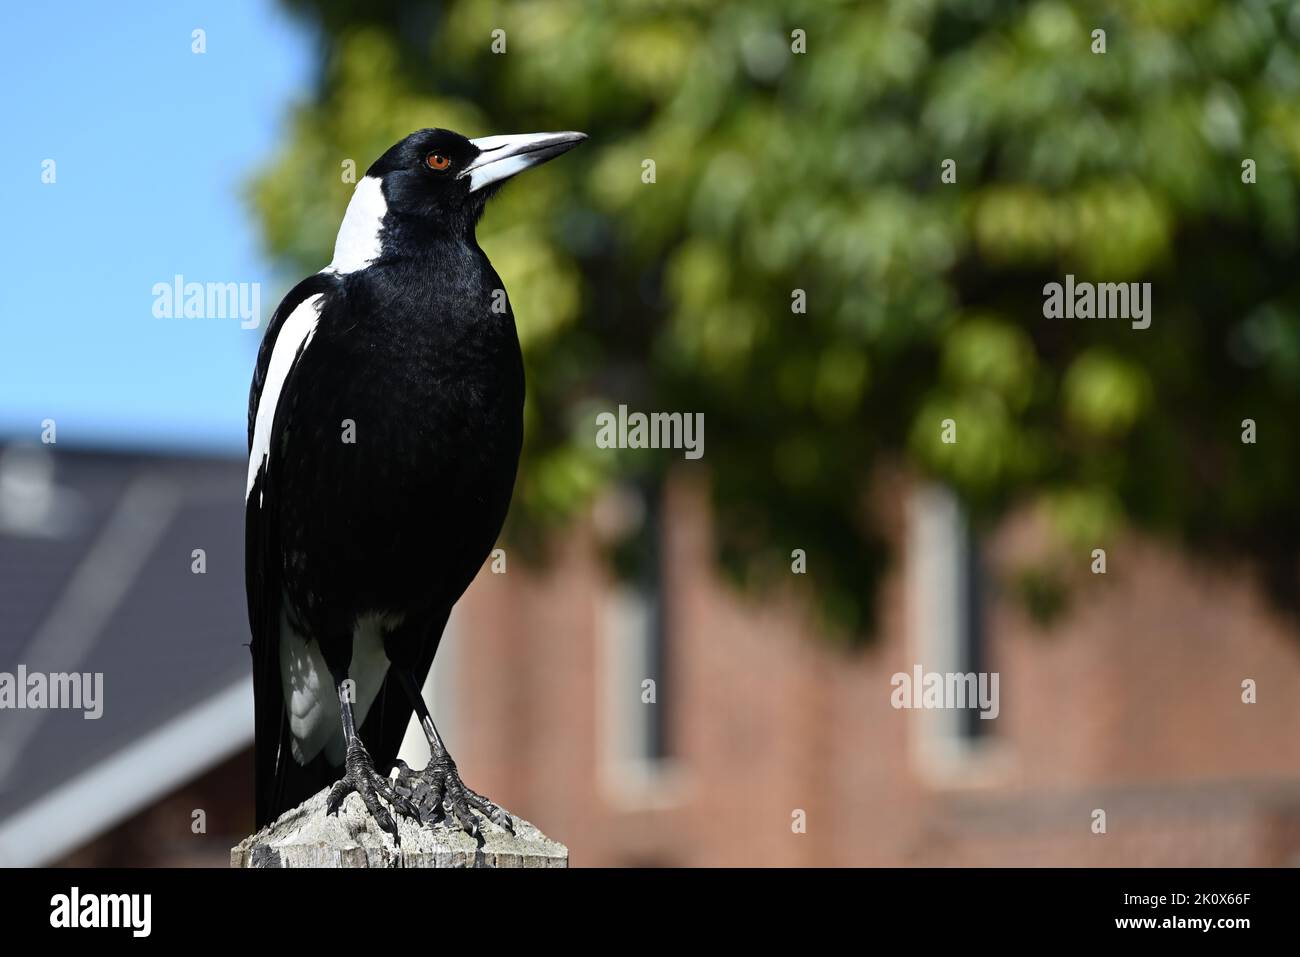 Stern-looking male Australian magpie, standing in a stiff upright manner, perched on wooden fencepost with its head turned to the side Stock Photo